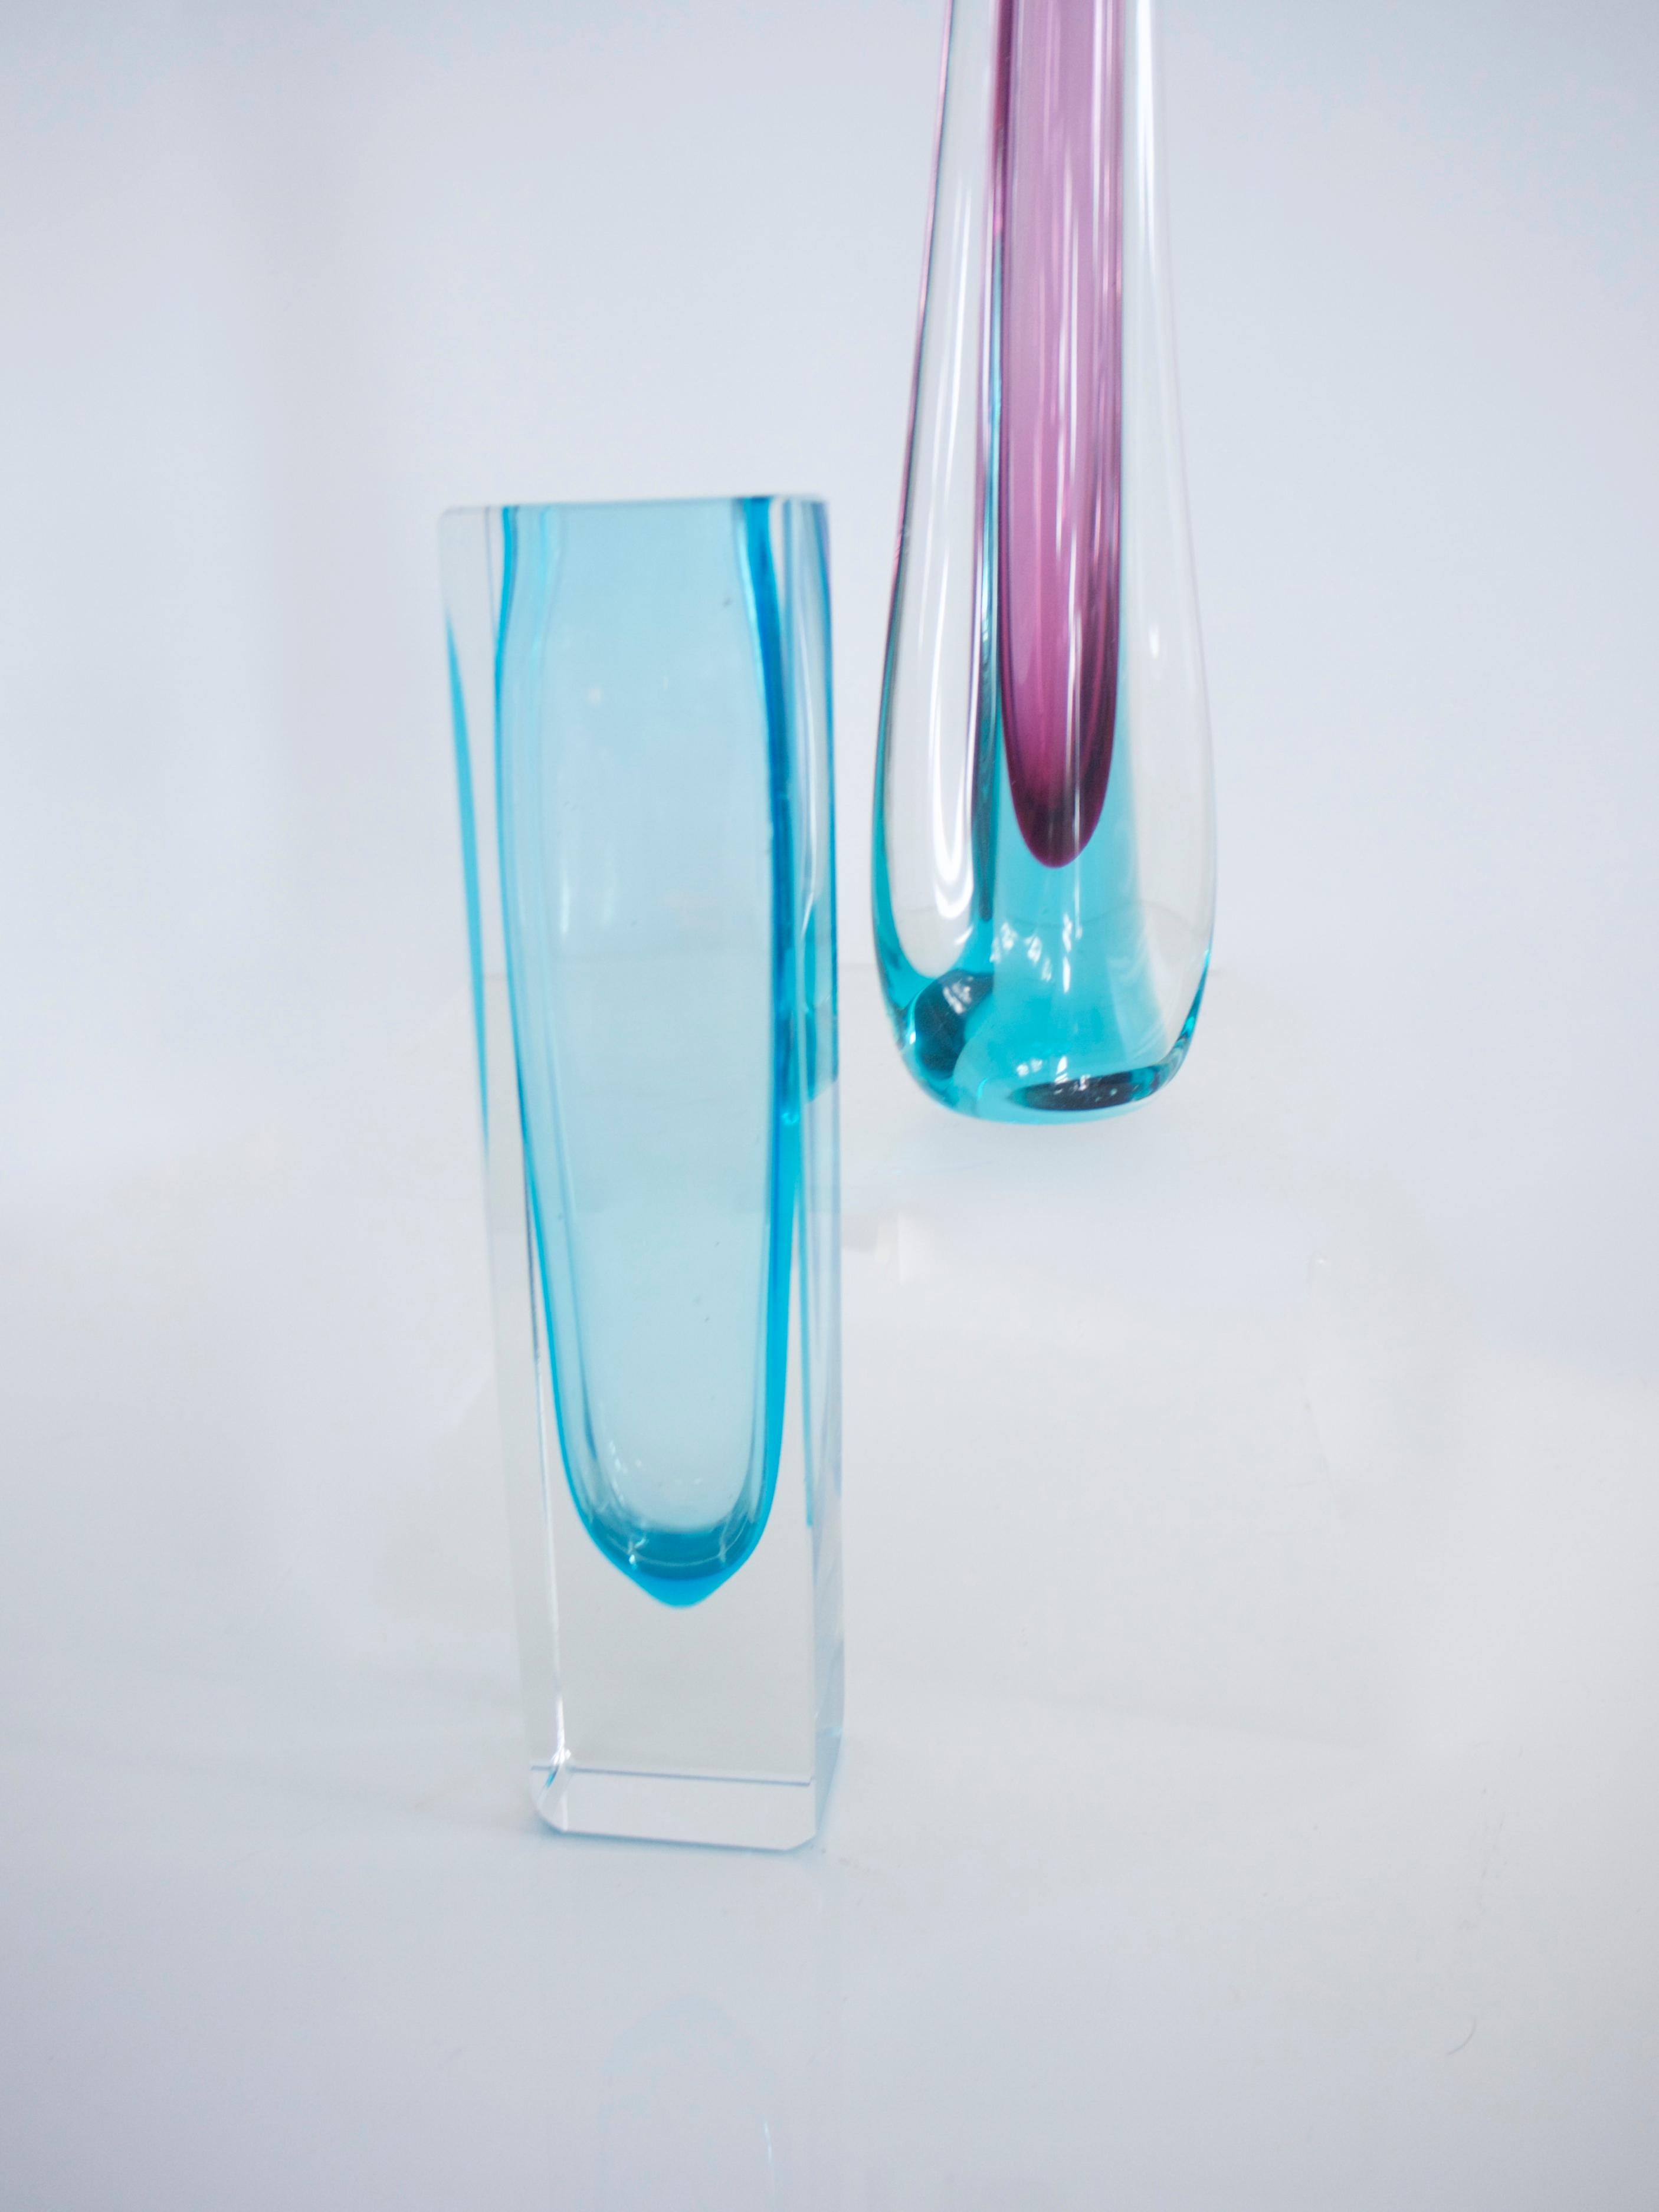 Mid-Century Modern Modernist Glass Vases Murano Teardrop by Ferro and 'Block' Vase by Nuutajarvi For Sale